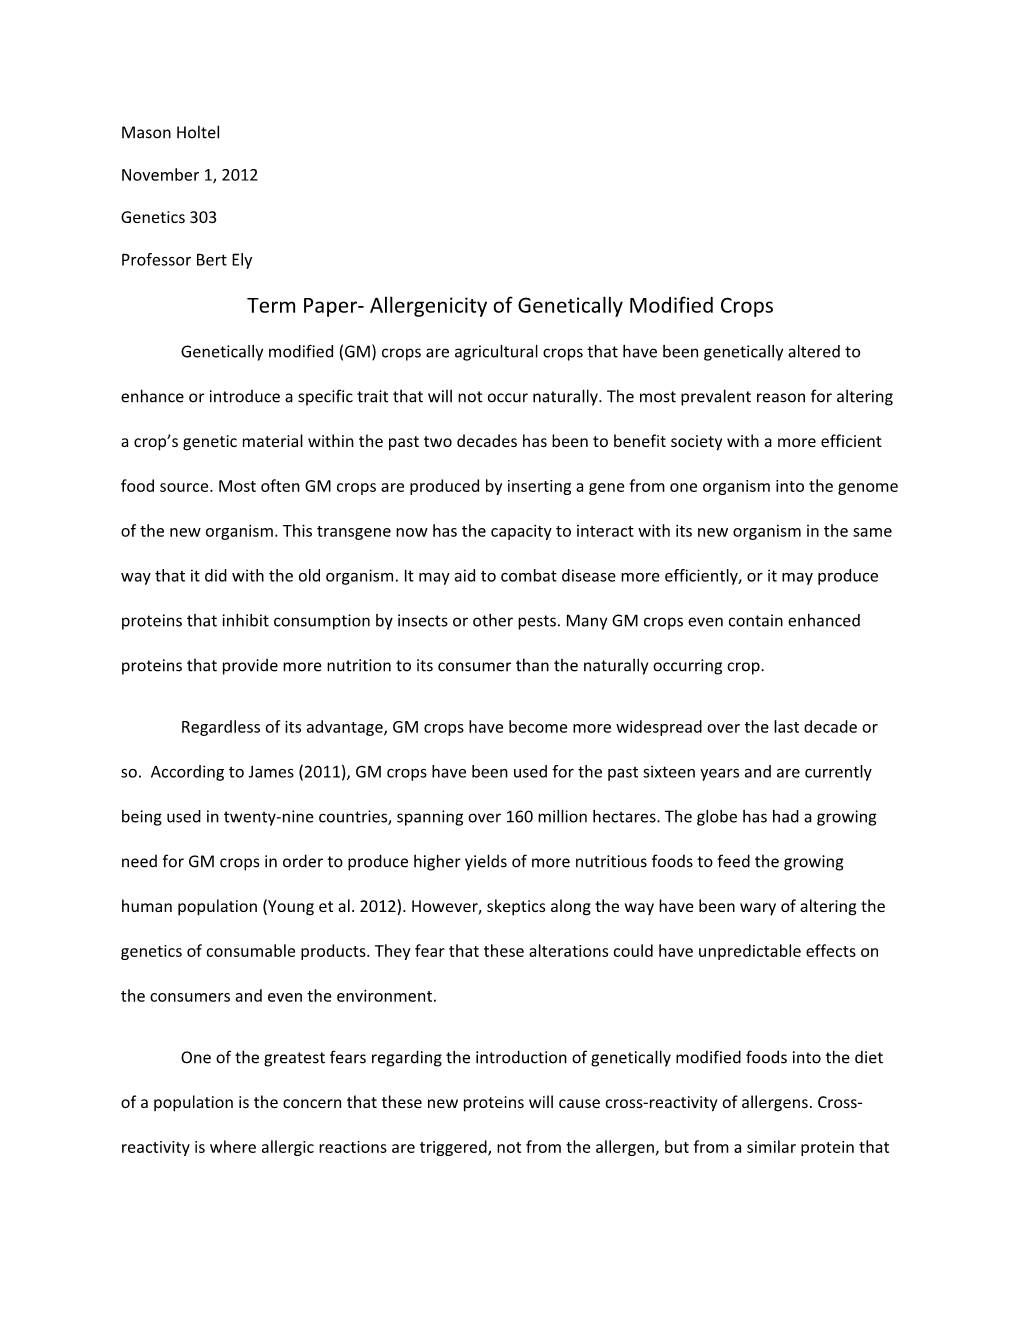 Term Paper- Allergenicity of Genetically Modified Crops